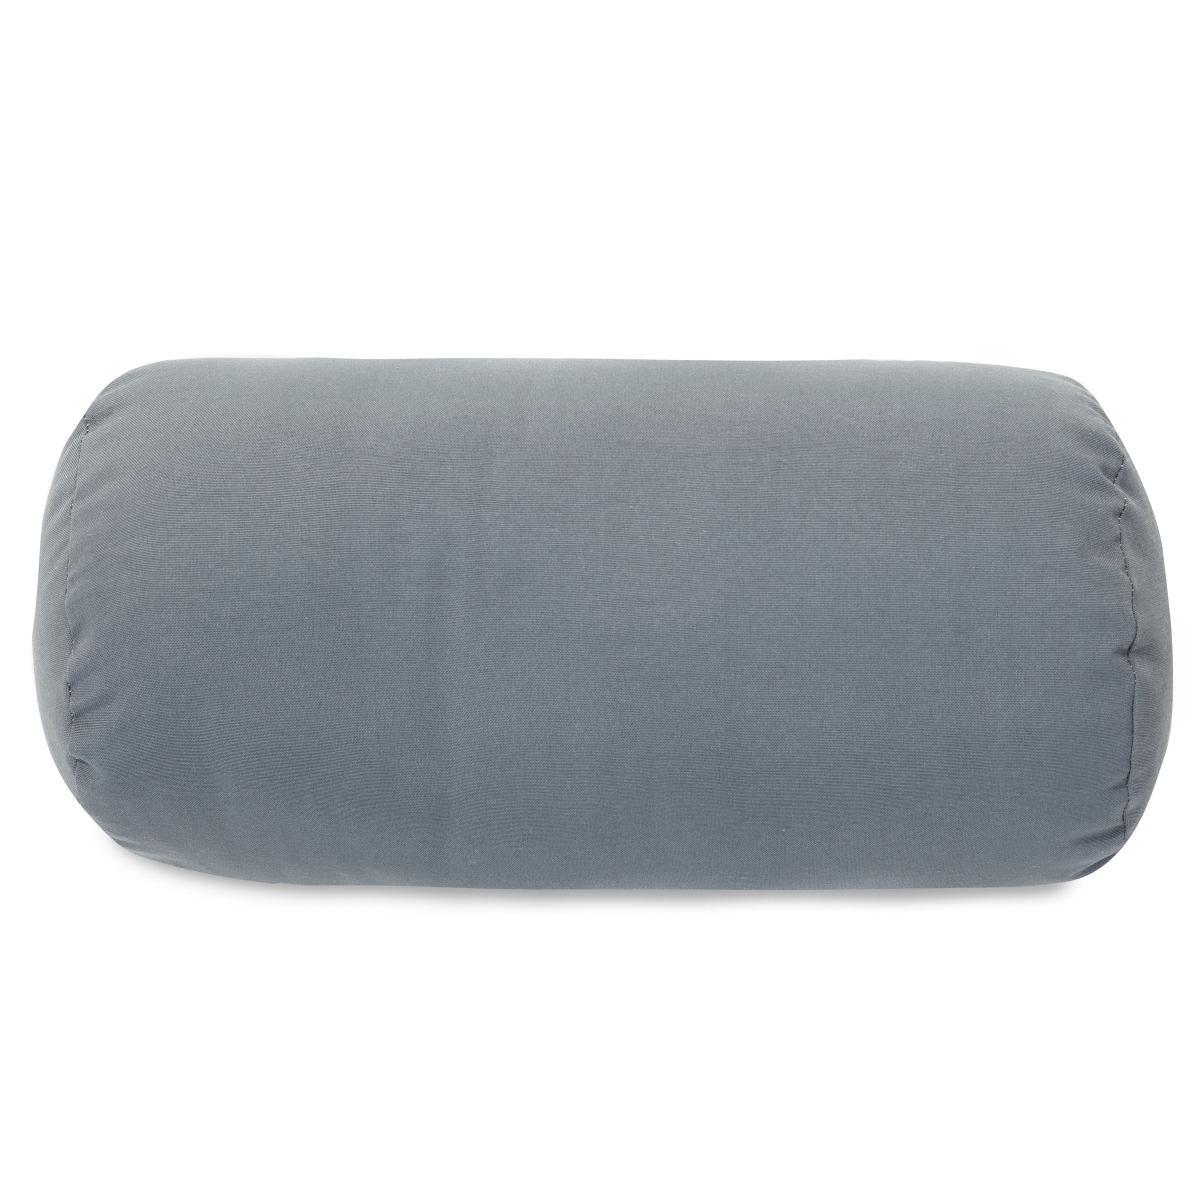 Majestic Home 85907223088 Gray Solid Reading Pillow - 33 X 6 X 18 In.